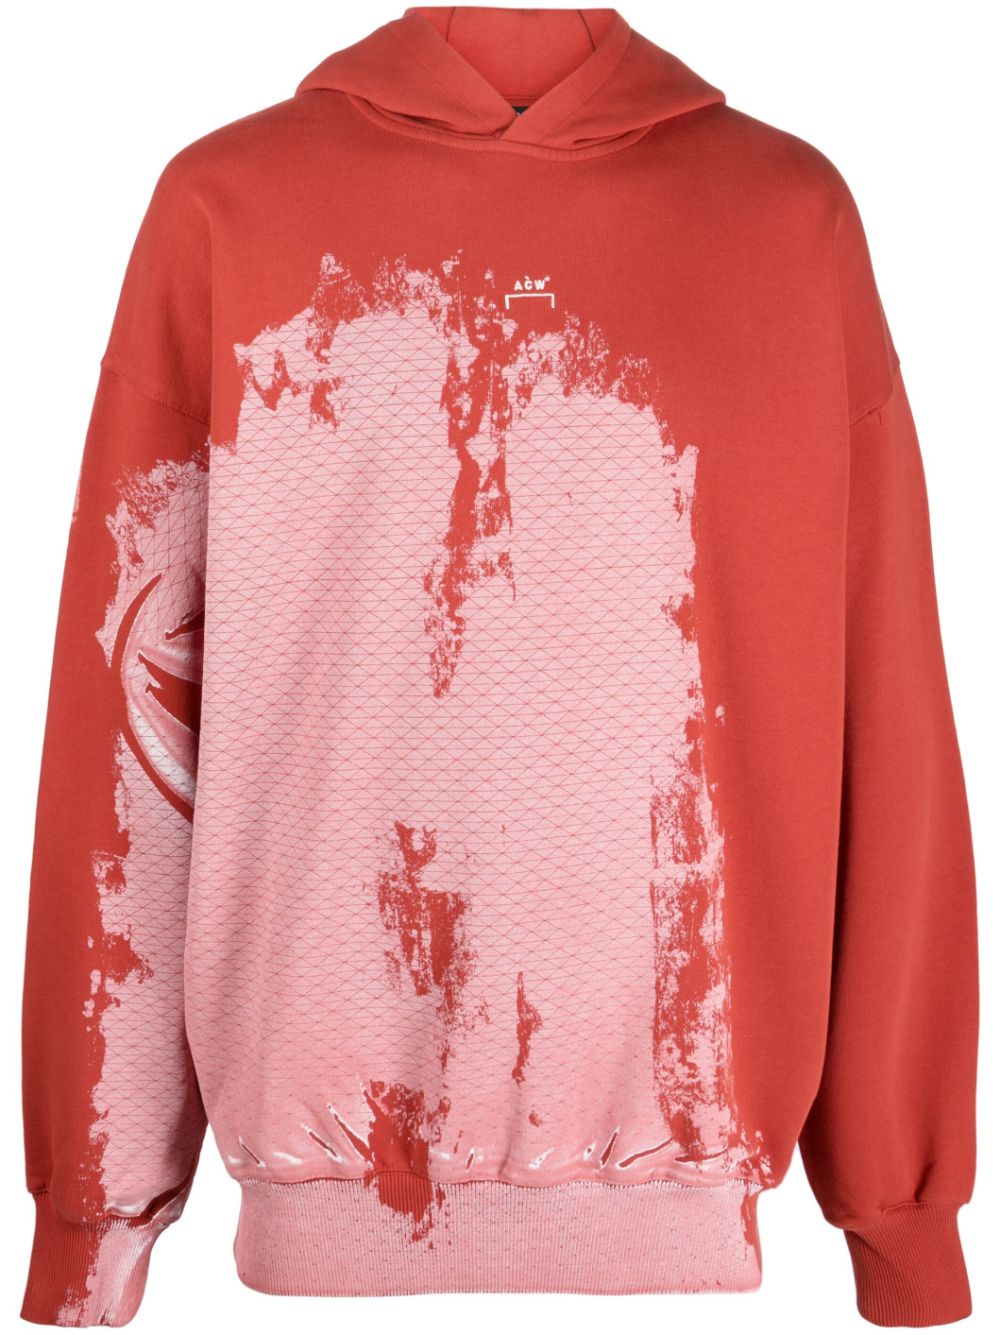 A-COLD-WALL* tie-dye effect hooded sweatshirt - Red von A-COLD-WALL*